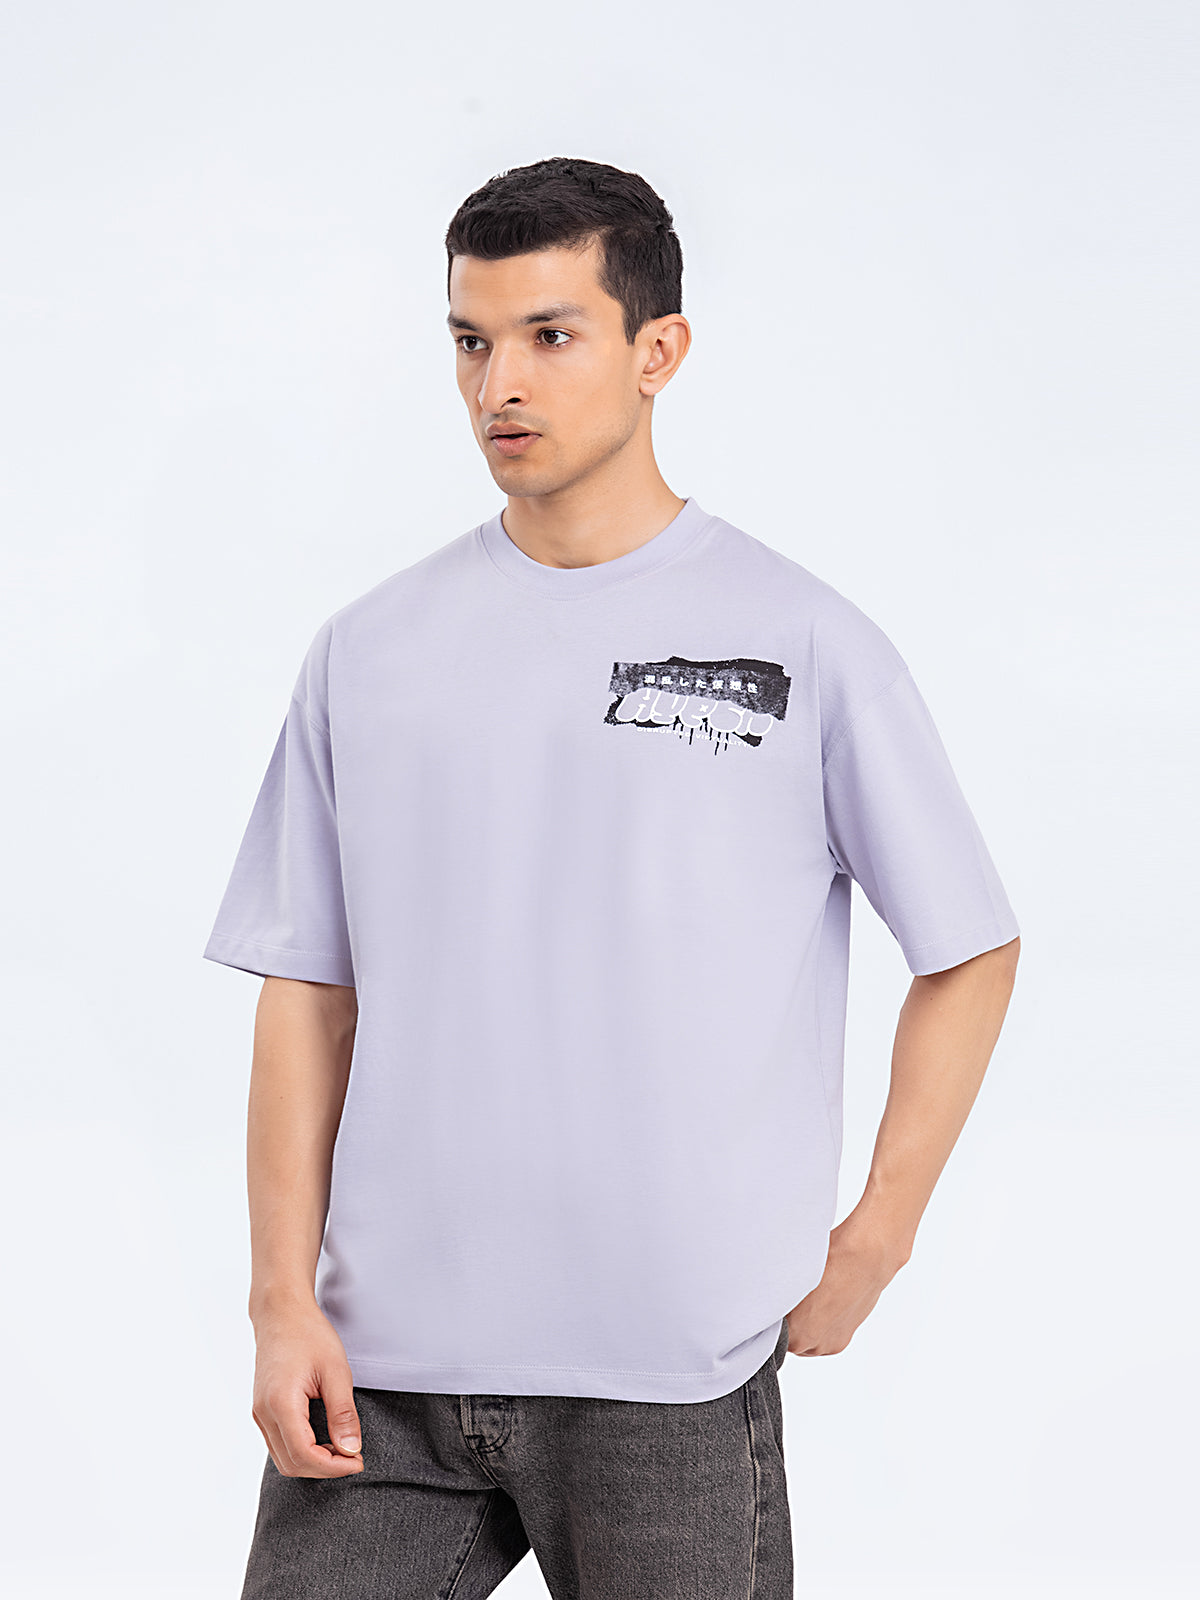 Relaxed Fit Graphic Tee - FMTGT24-025